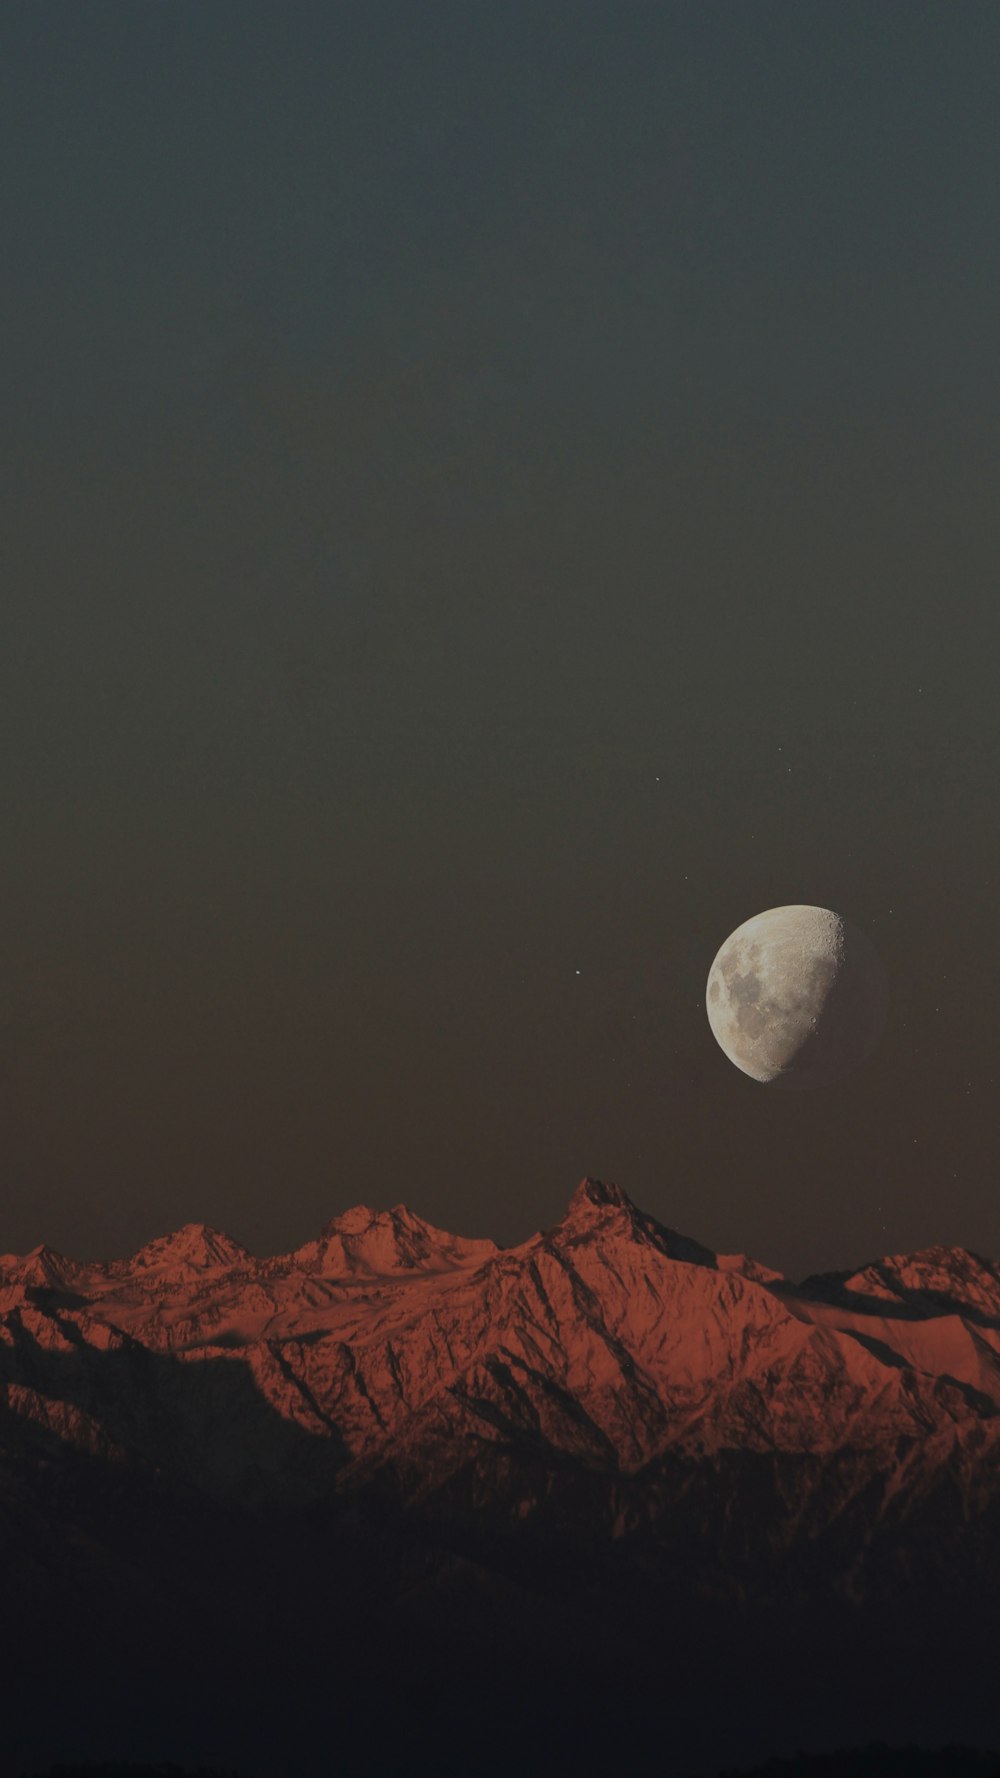 snow covered mountain under full moon